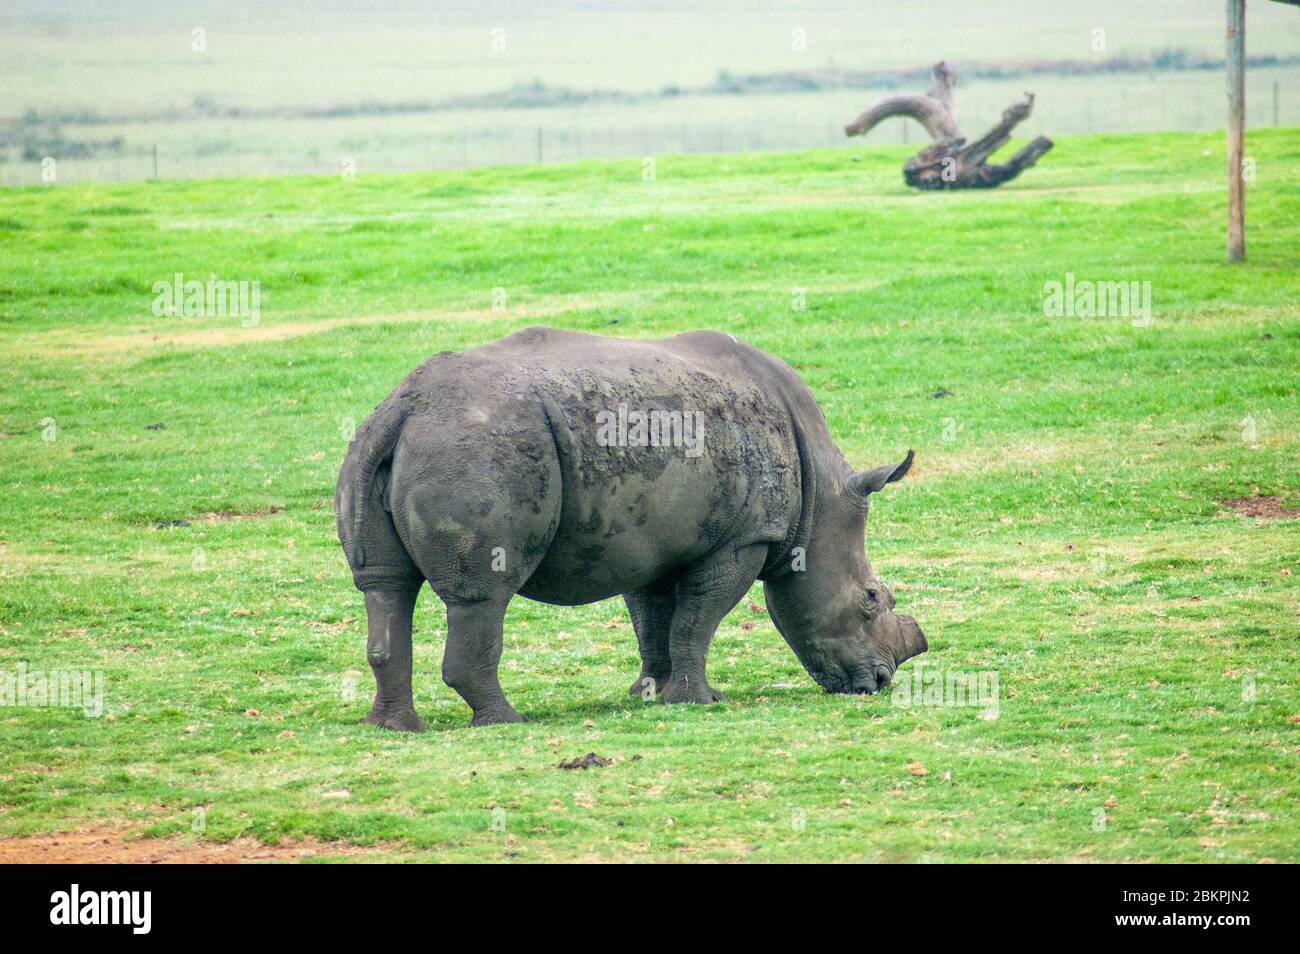 Wild Rhinoceros in South African Game Reserve Stockfoto